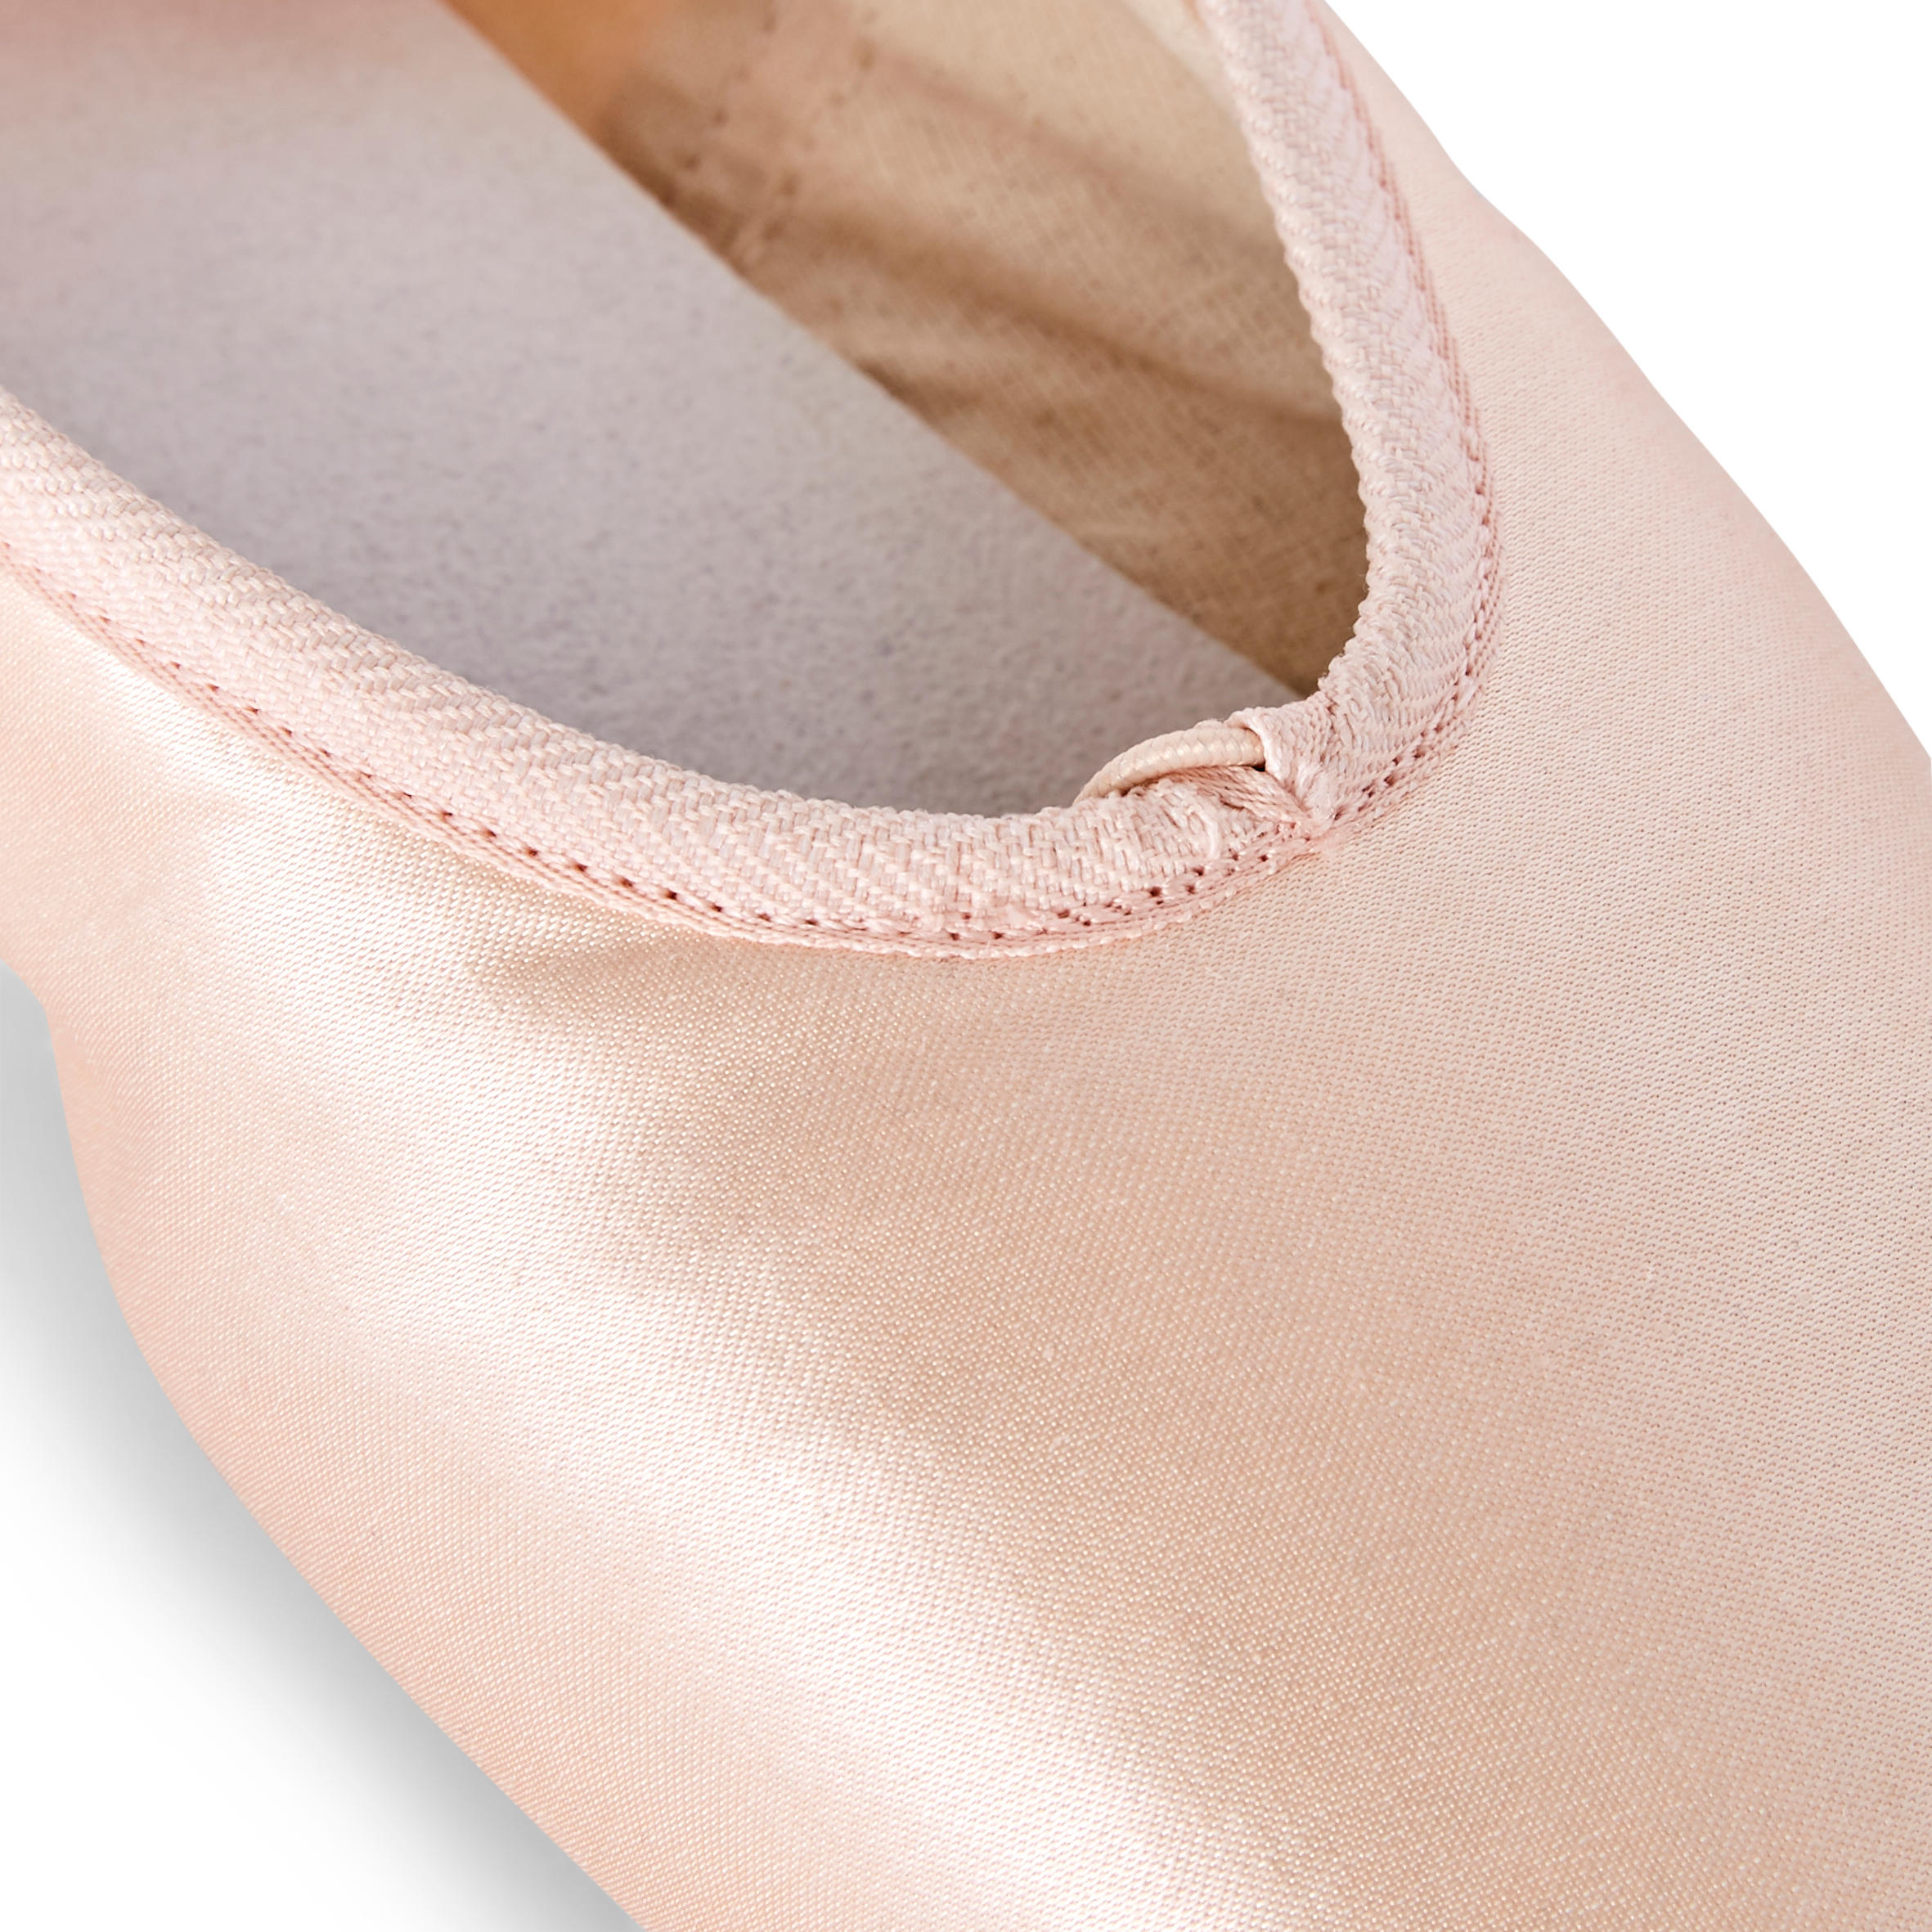 Beginner Pointe Shoes with Flexible Soles - STAREVER